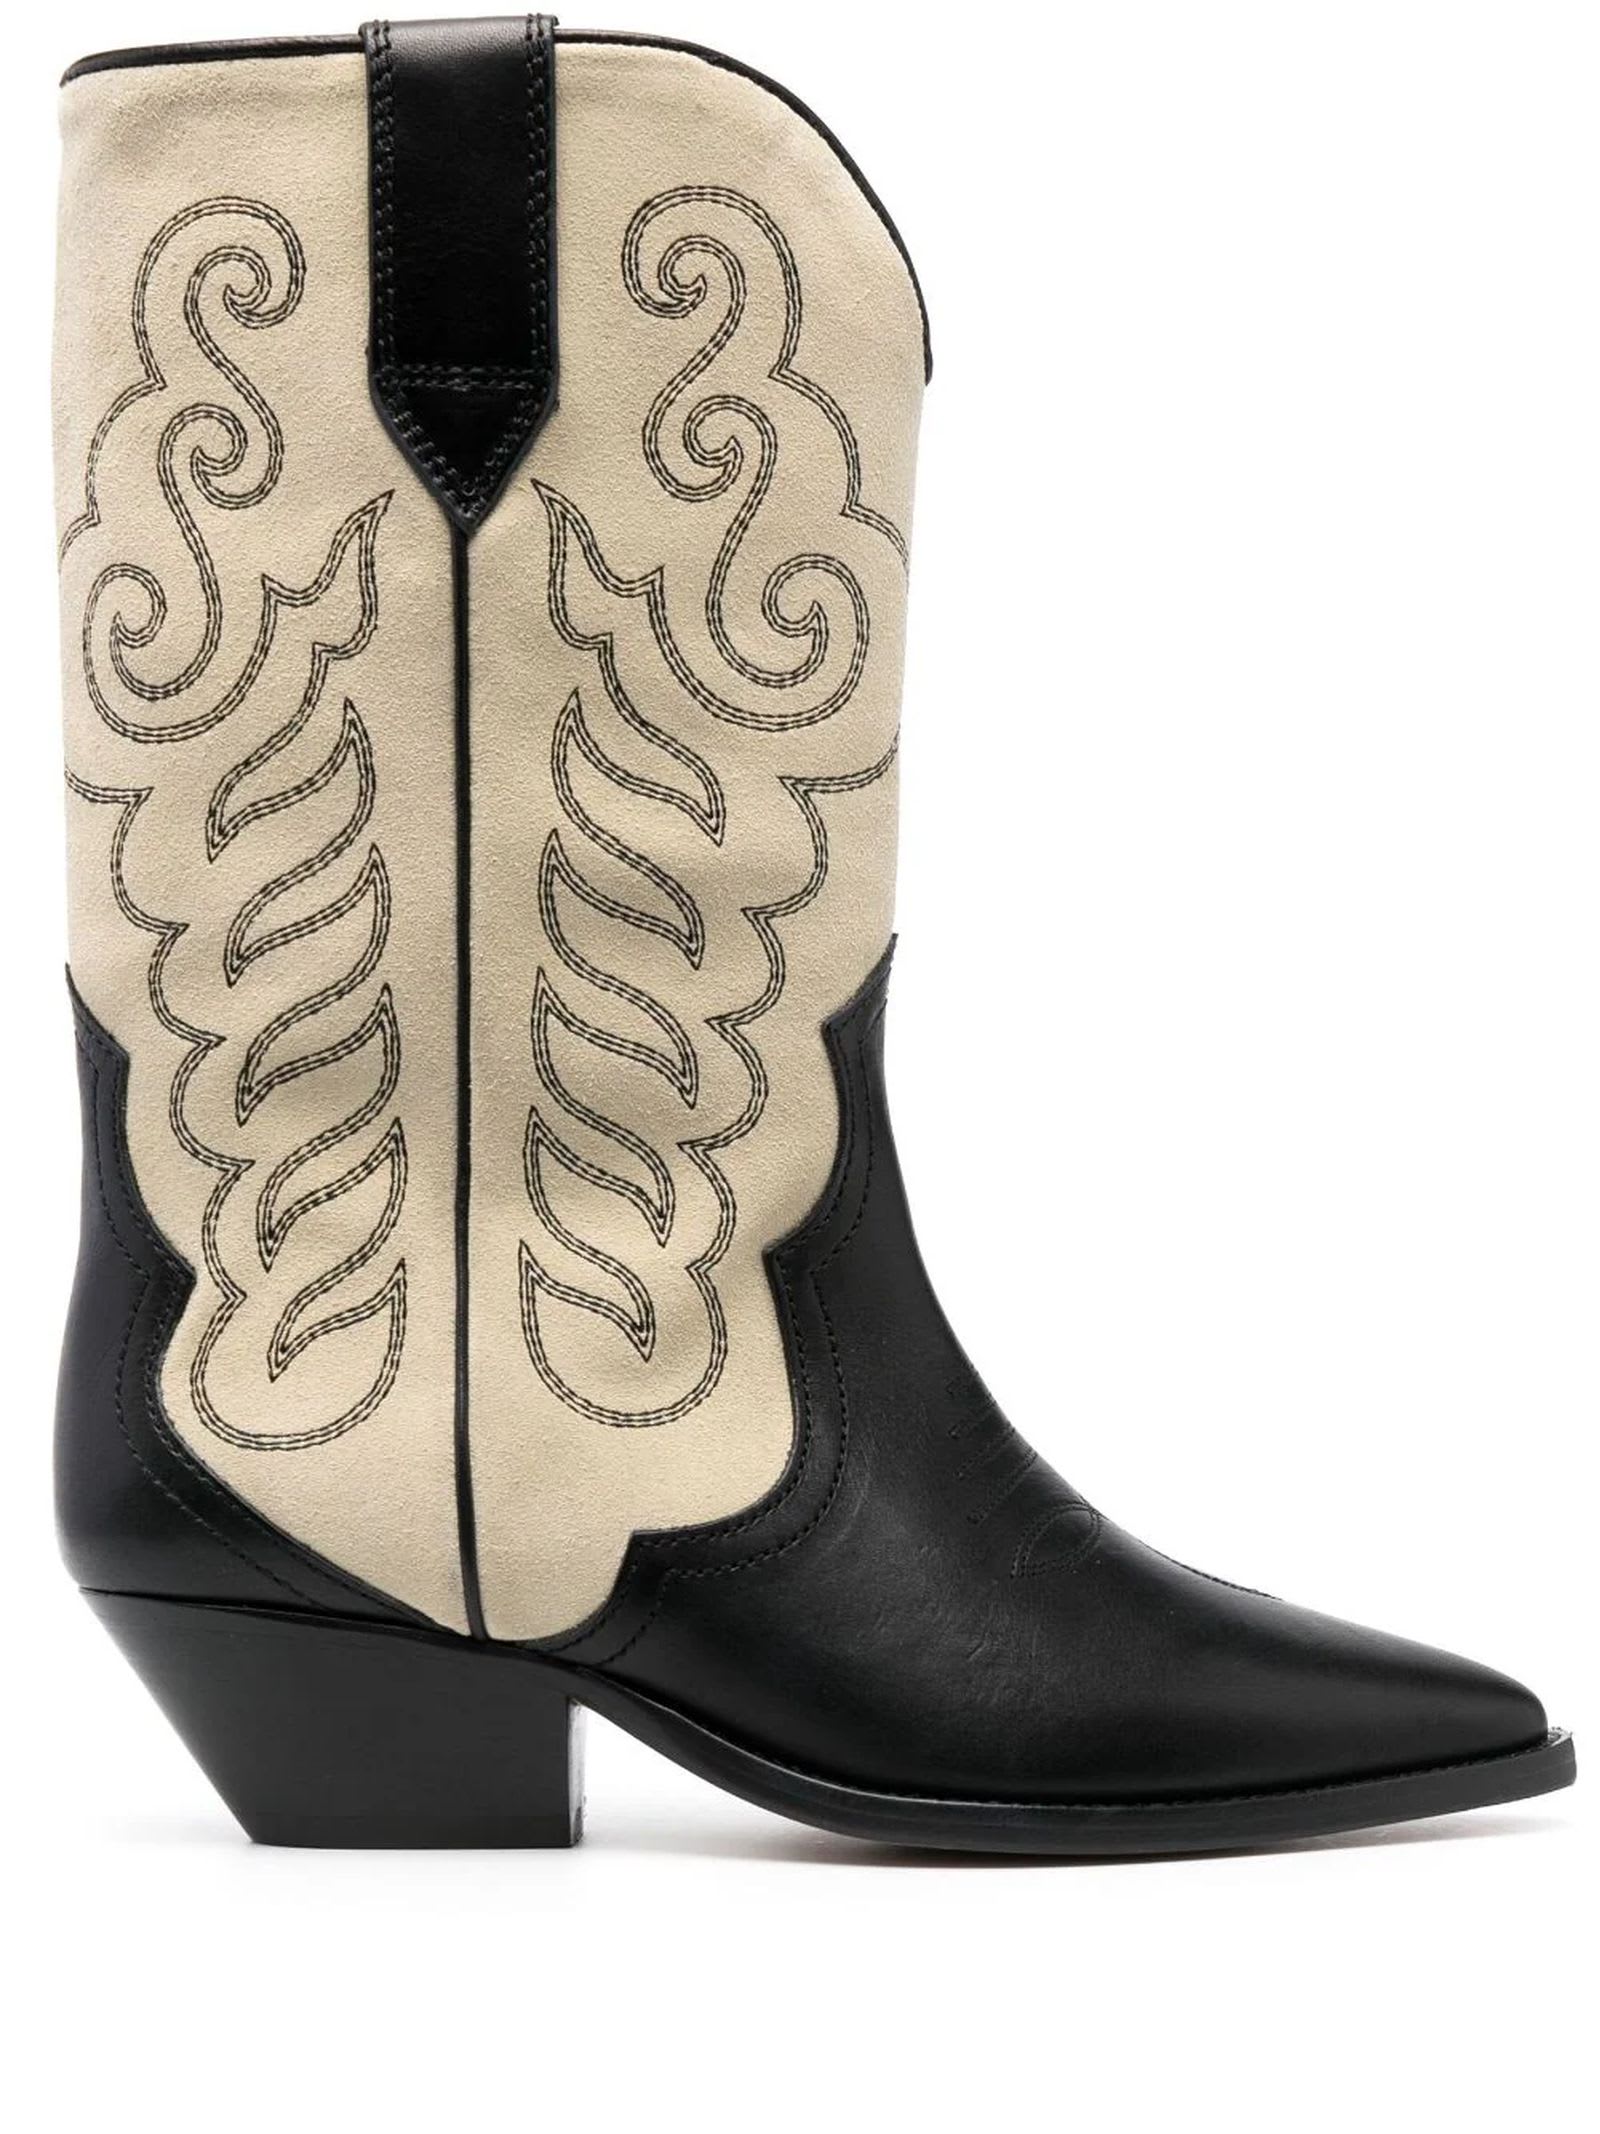 ISABEL MARANT BLACK AND BEIGE SUEDE WESTERN BOOTS